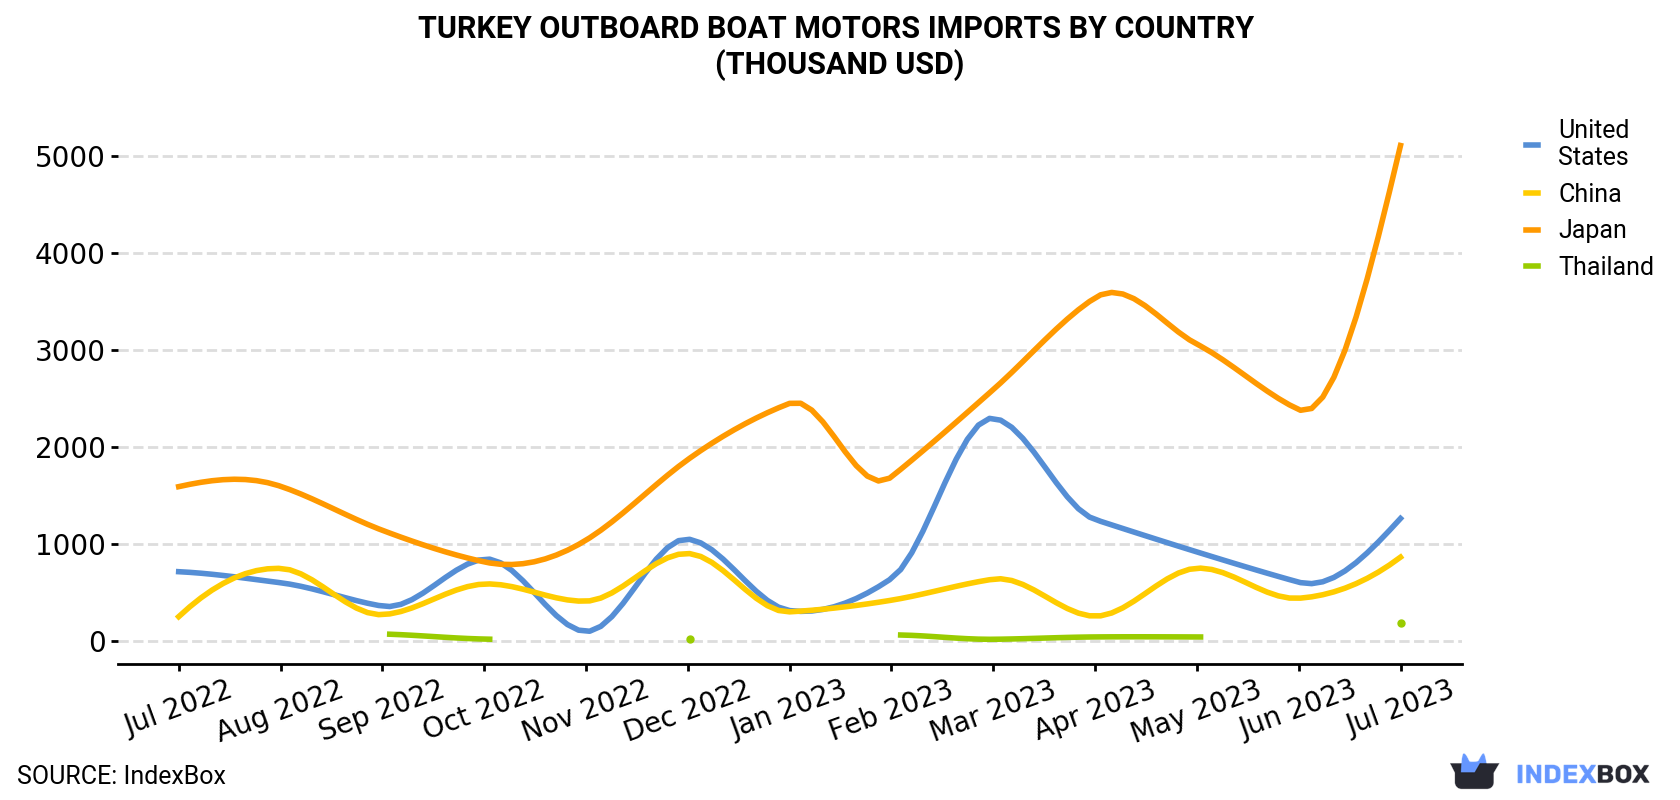 Turkey Outboard Boat Motors Imports By Country (Thousand USD)